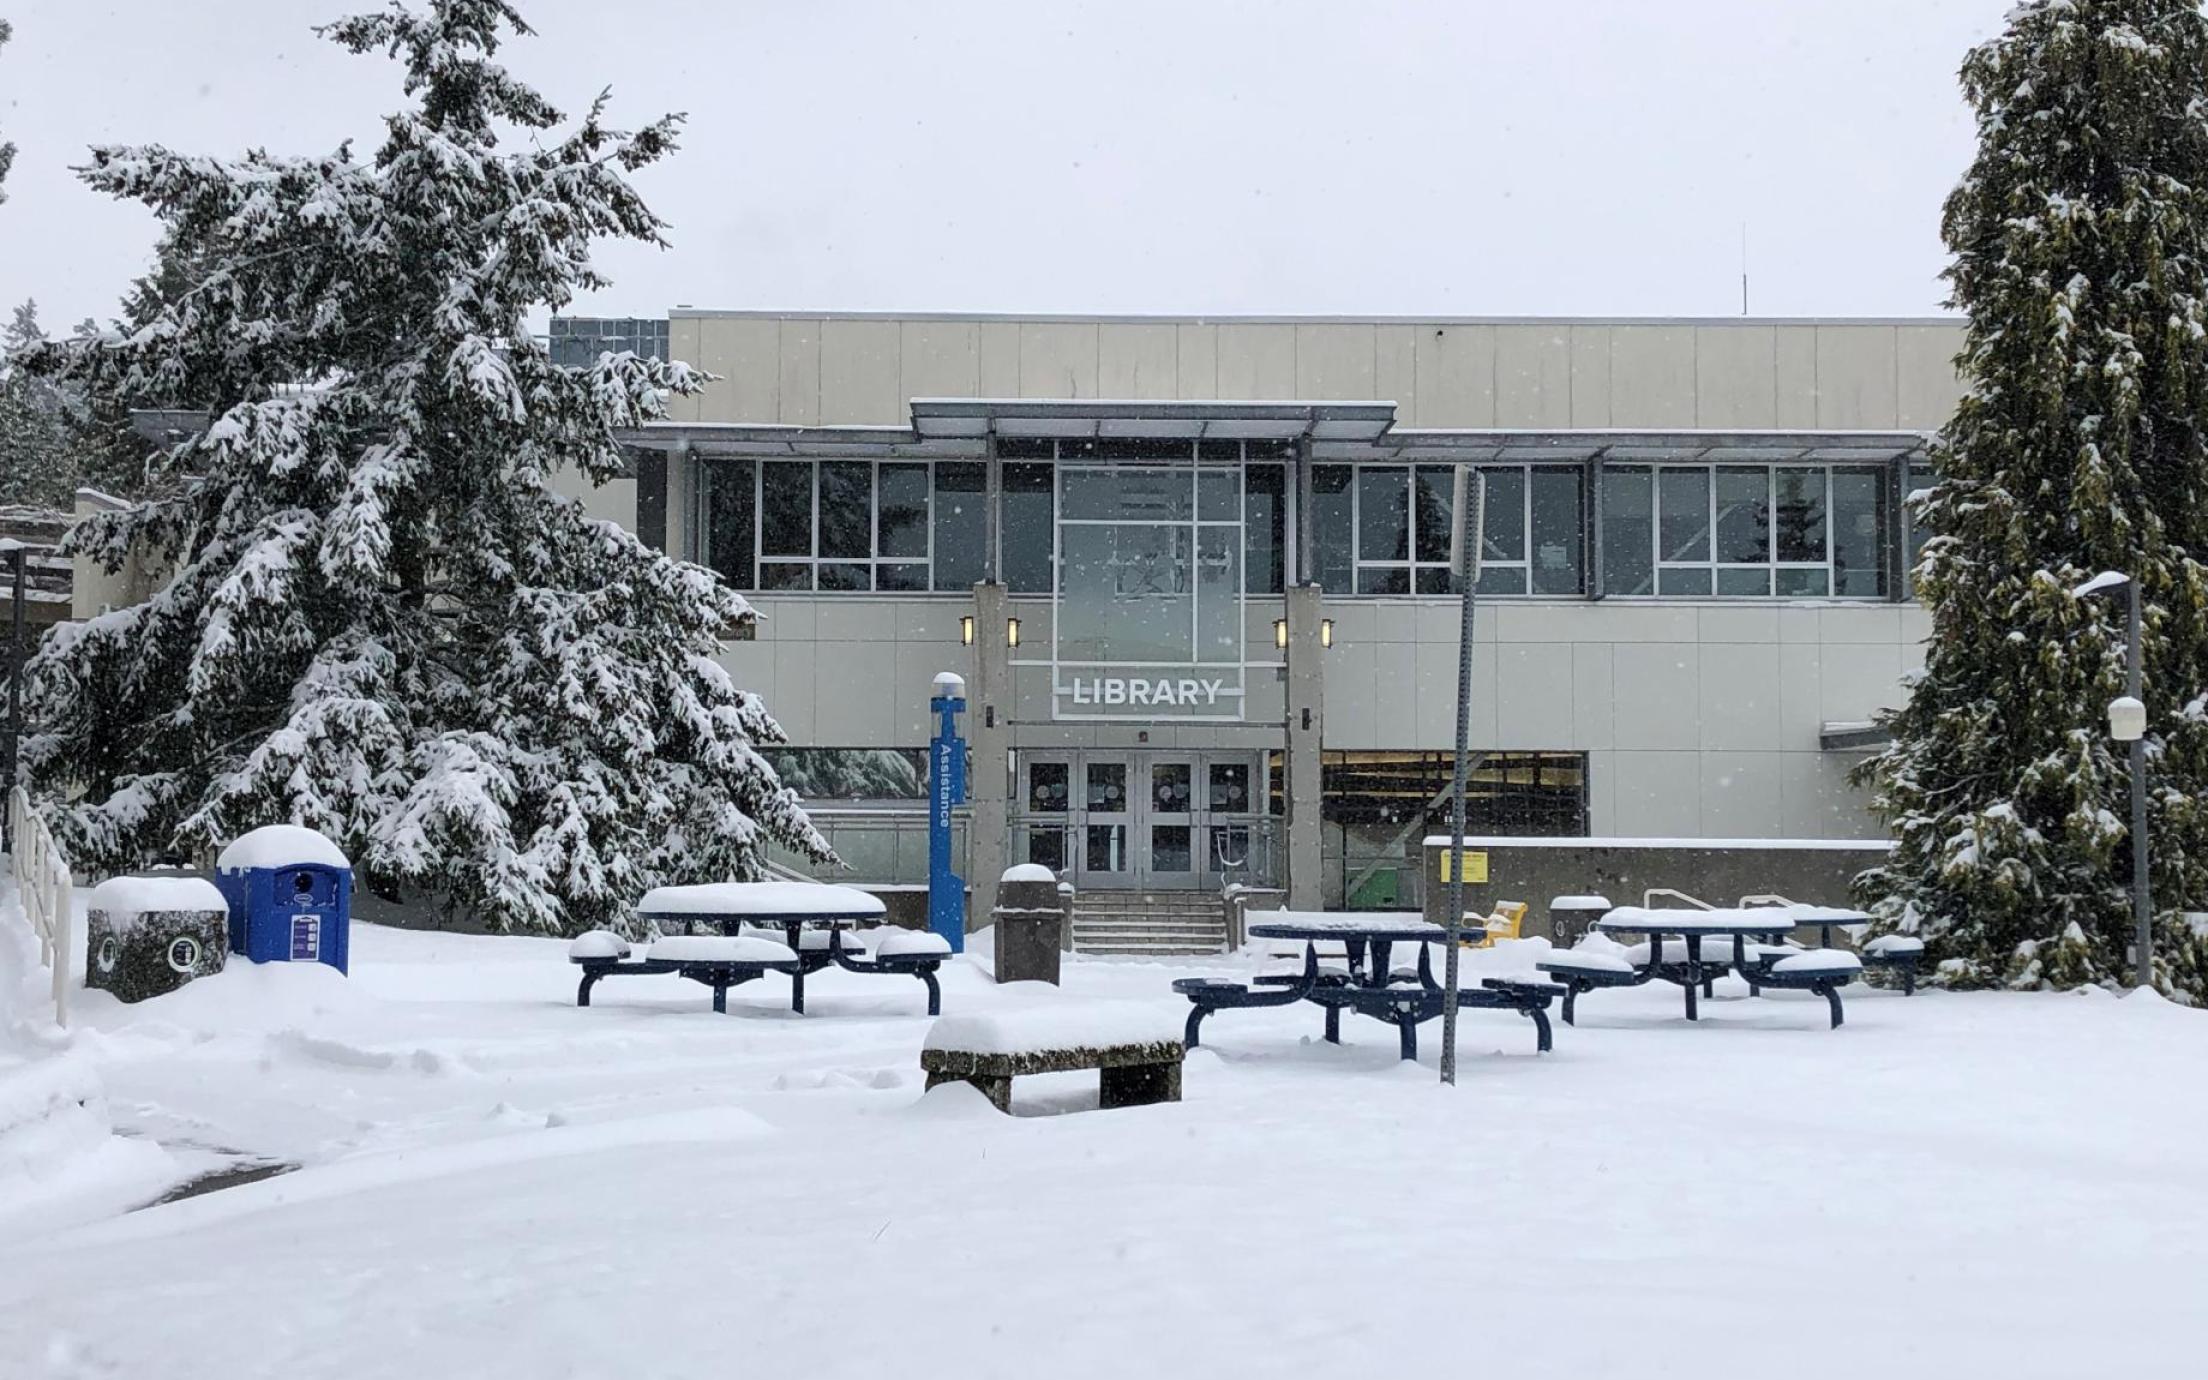 A view of VIU's Nanaimo campus library from the exterior with a snowed-in quad